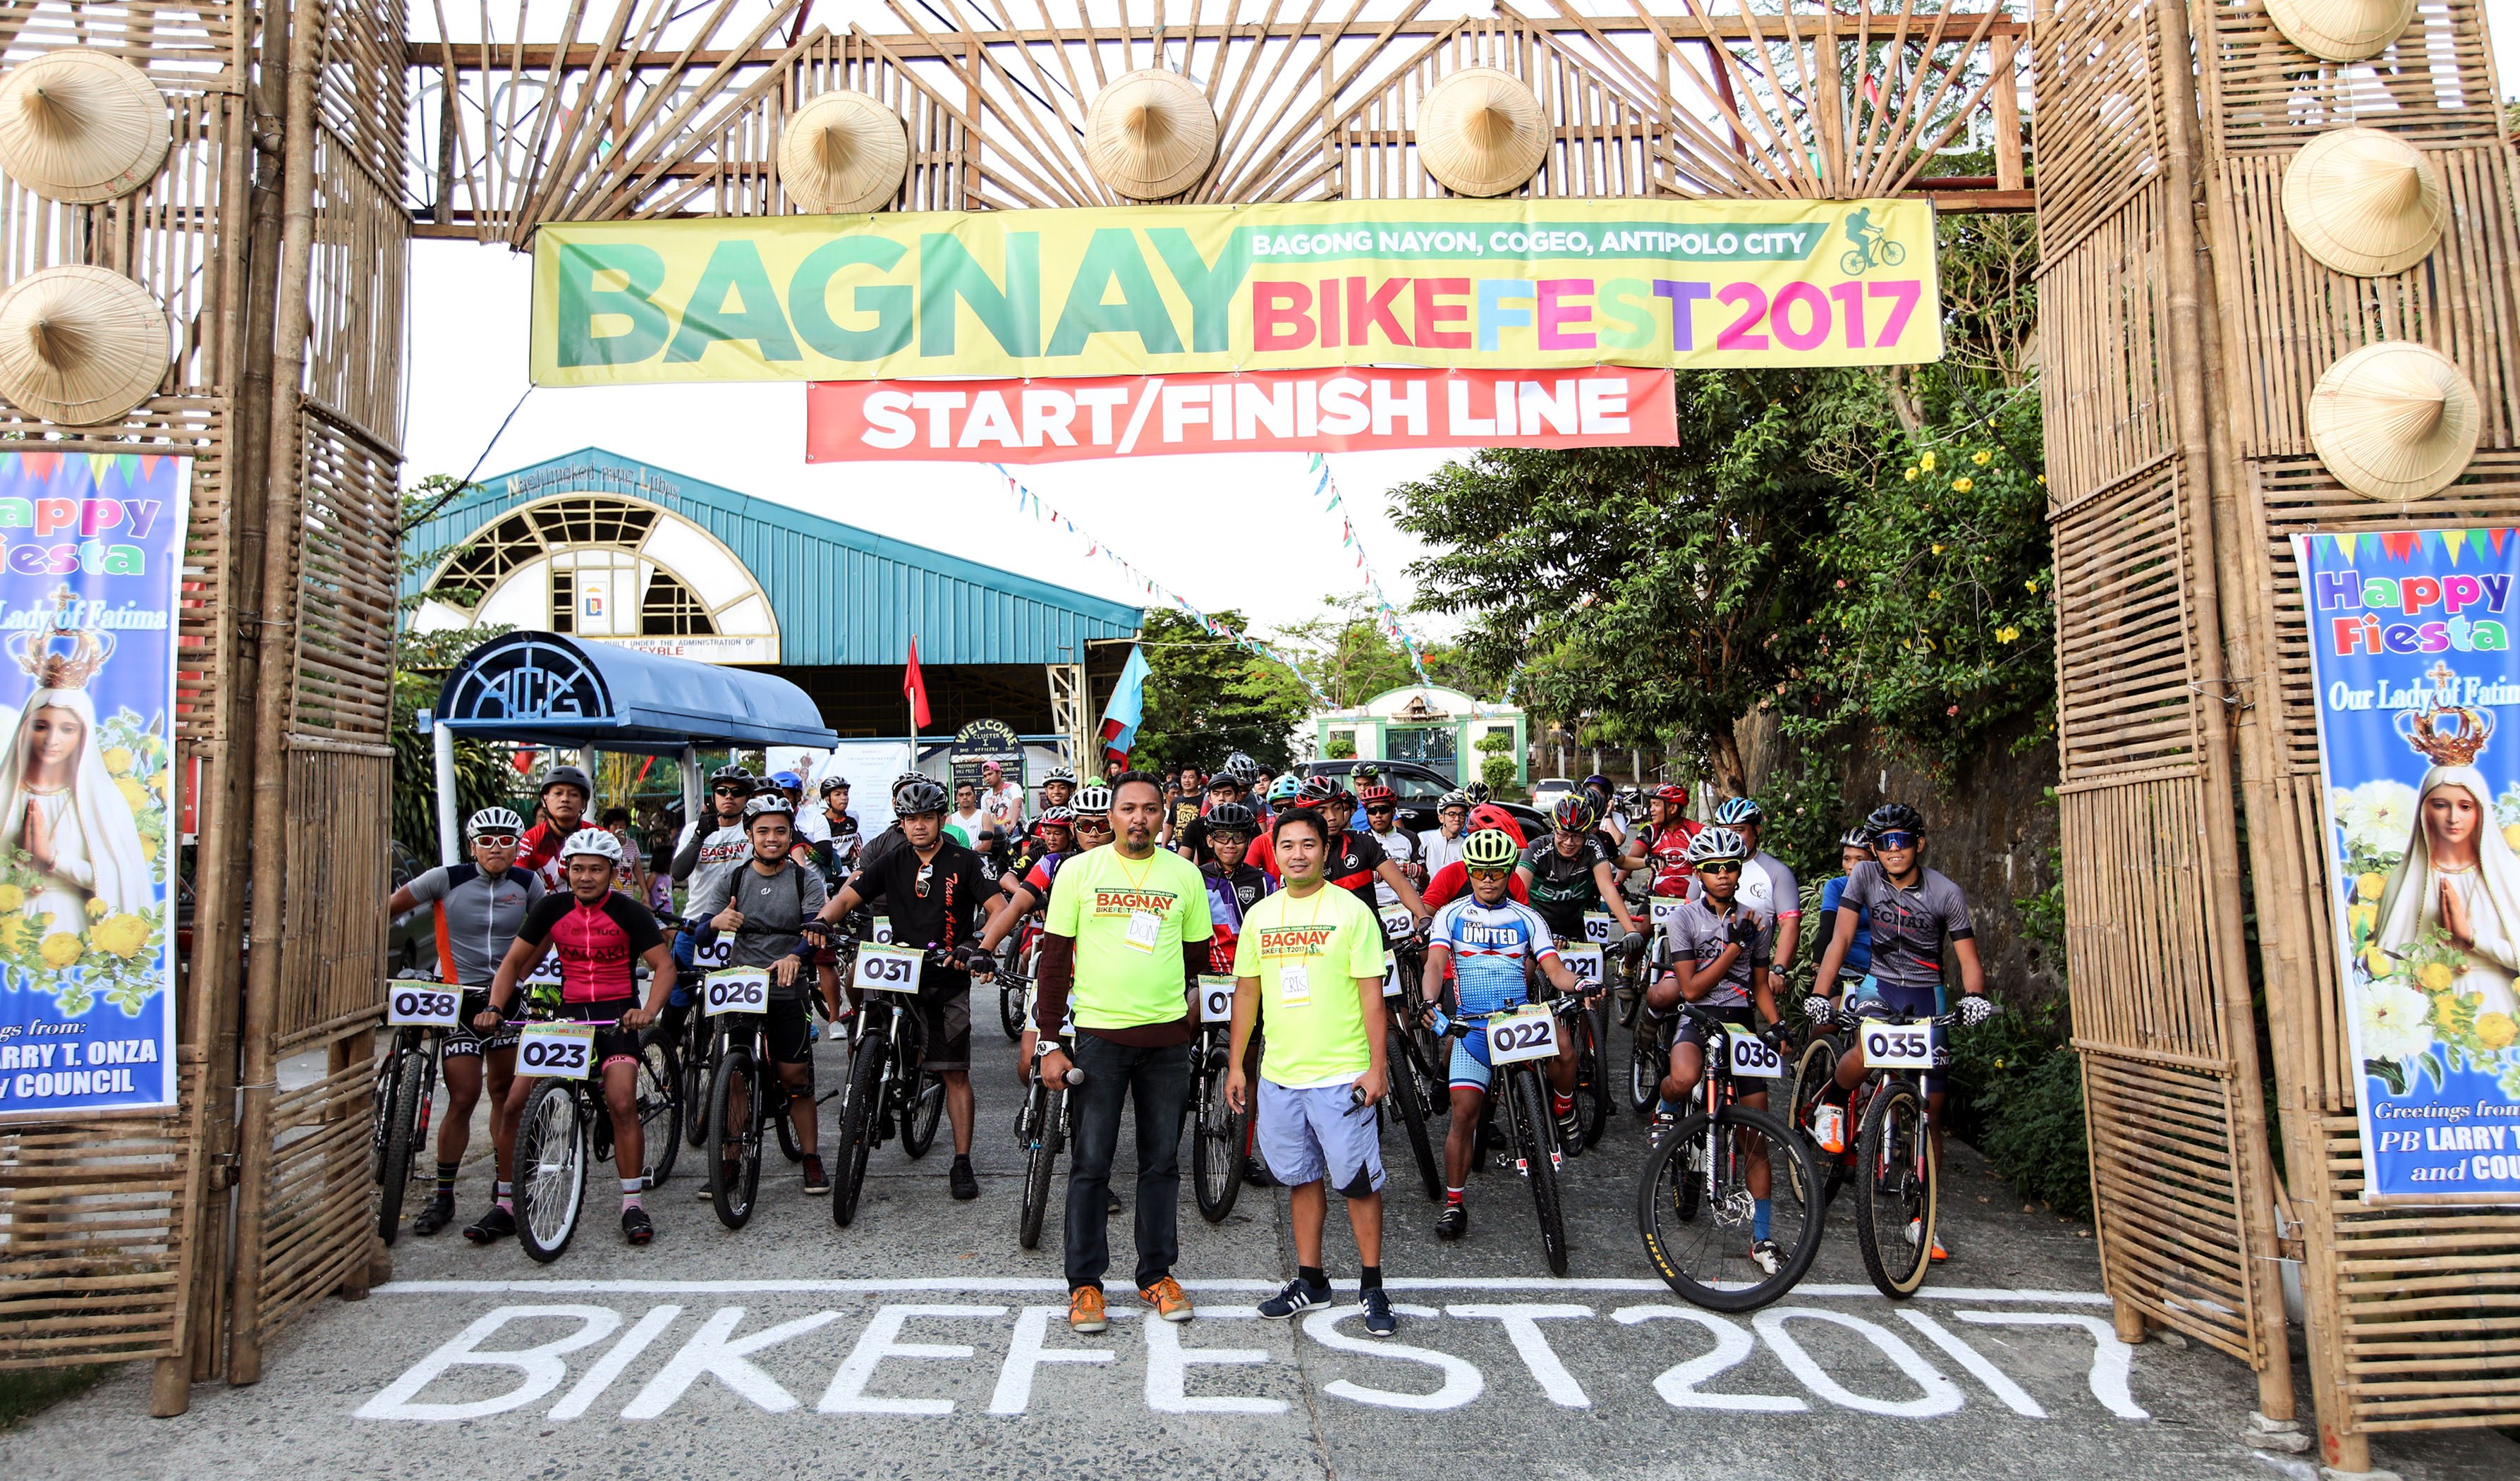 "BAGNAY Bikefest 2017" in Antipolo City